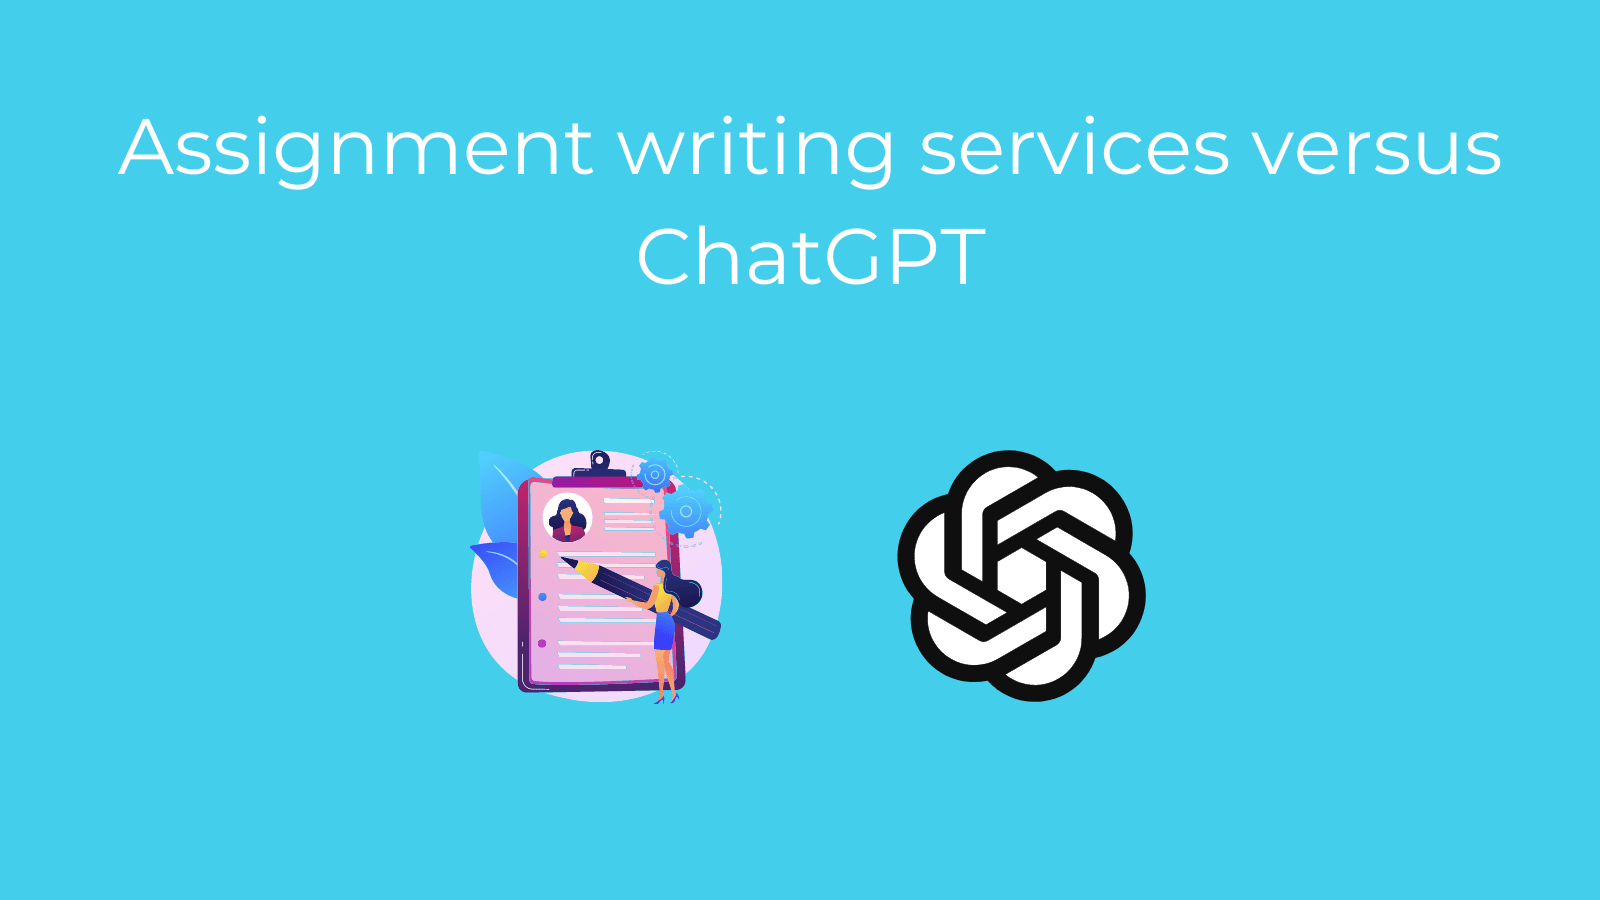 Assignment Writing Services versus ChatGPT